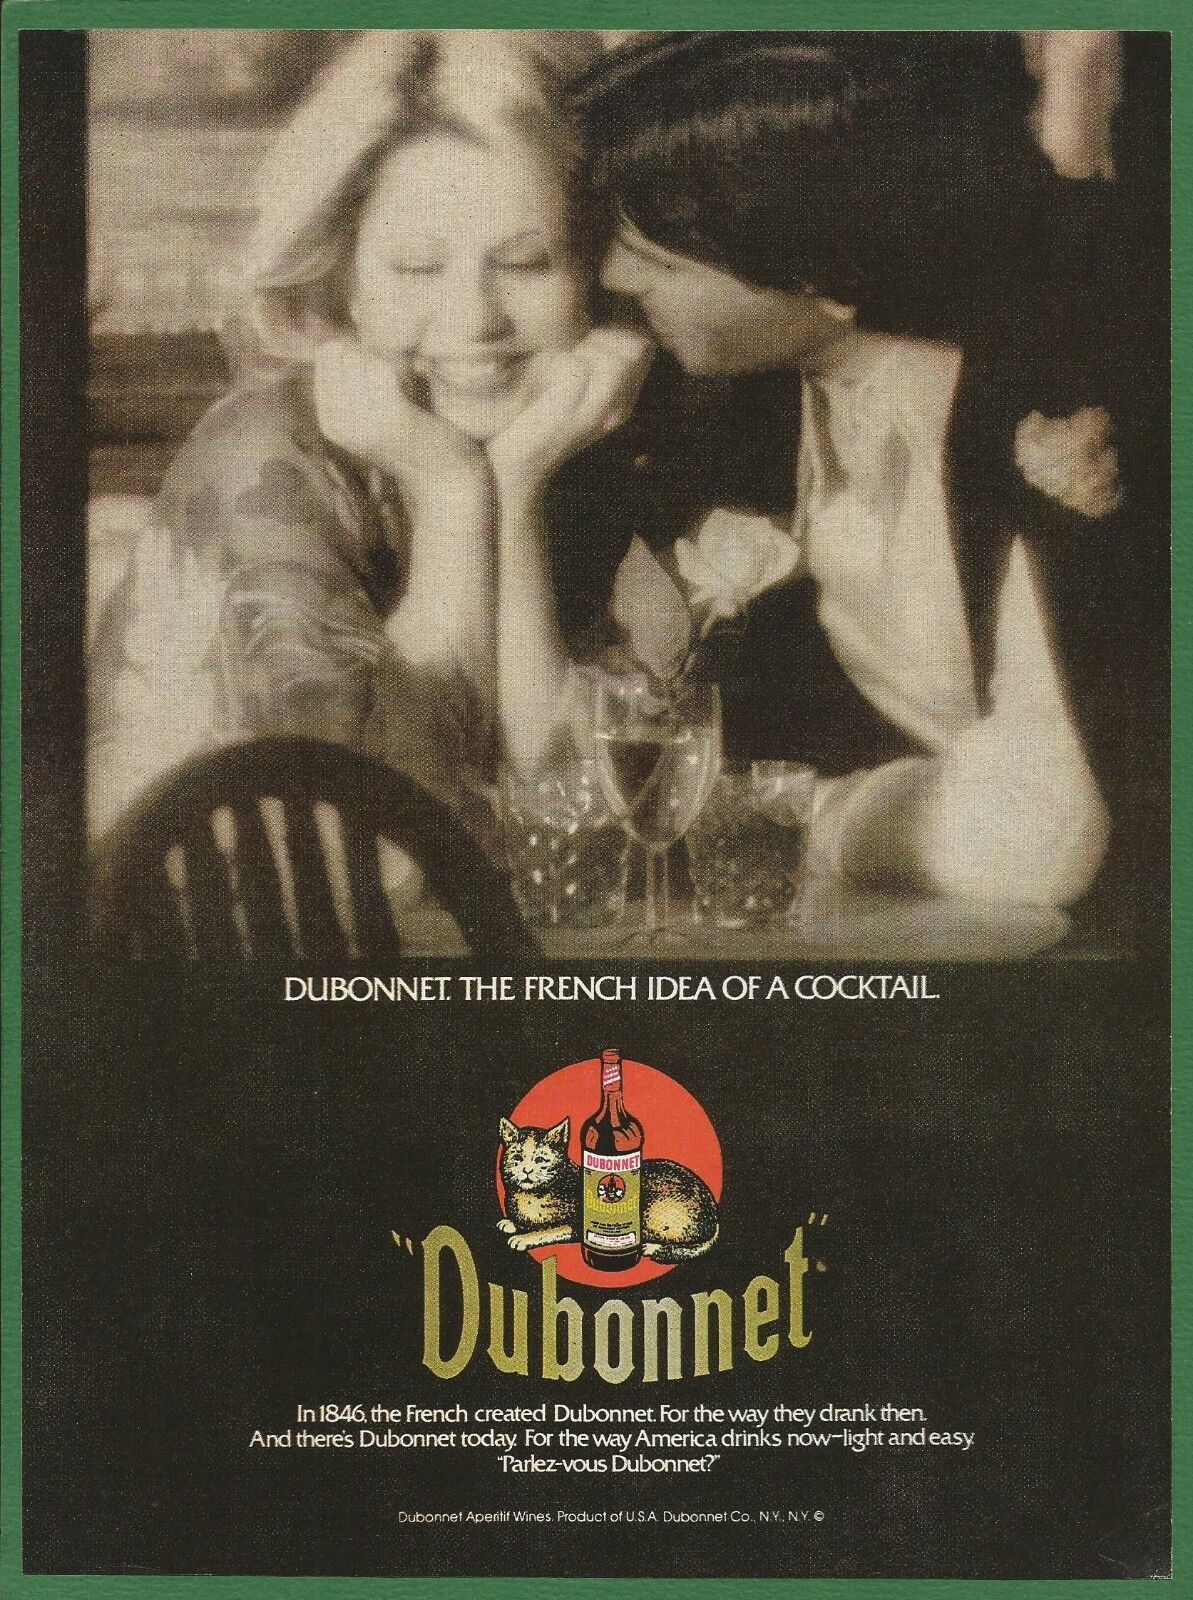 DUBONNET aperitif wine - The French idea of a cocktail - 1978 Vintage Print Ad 